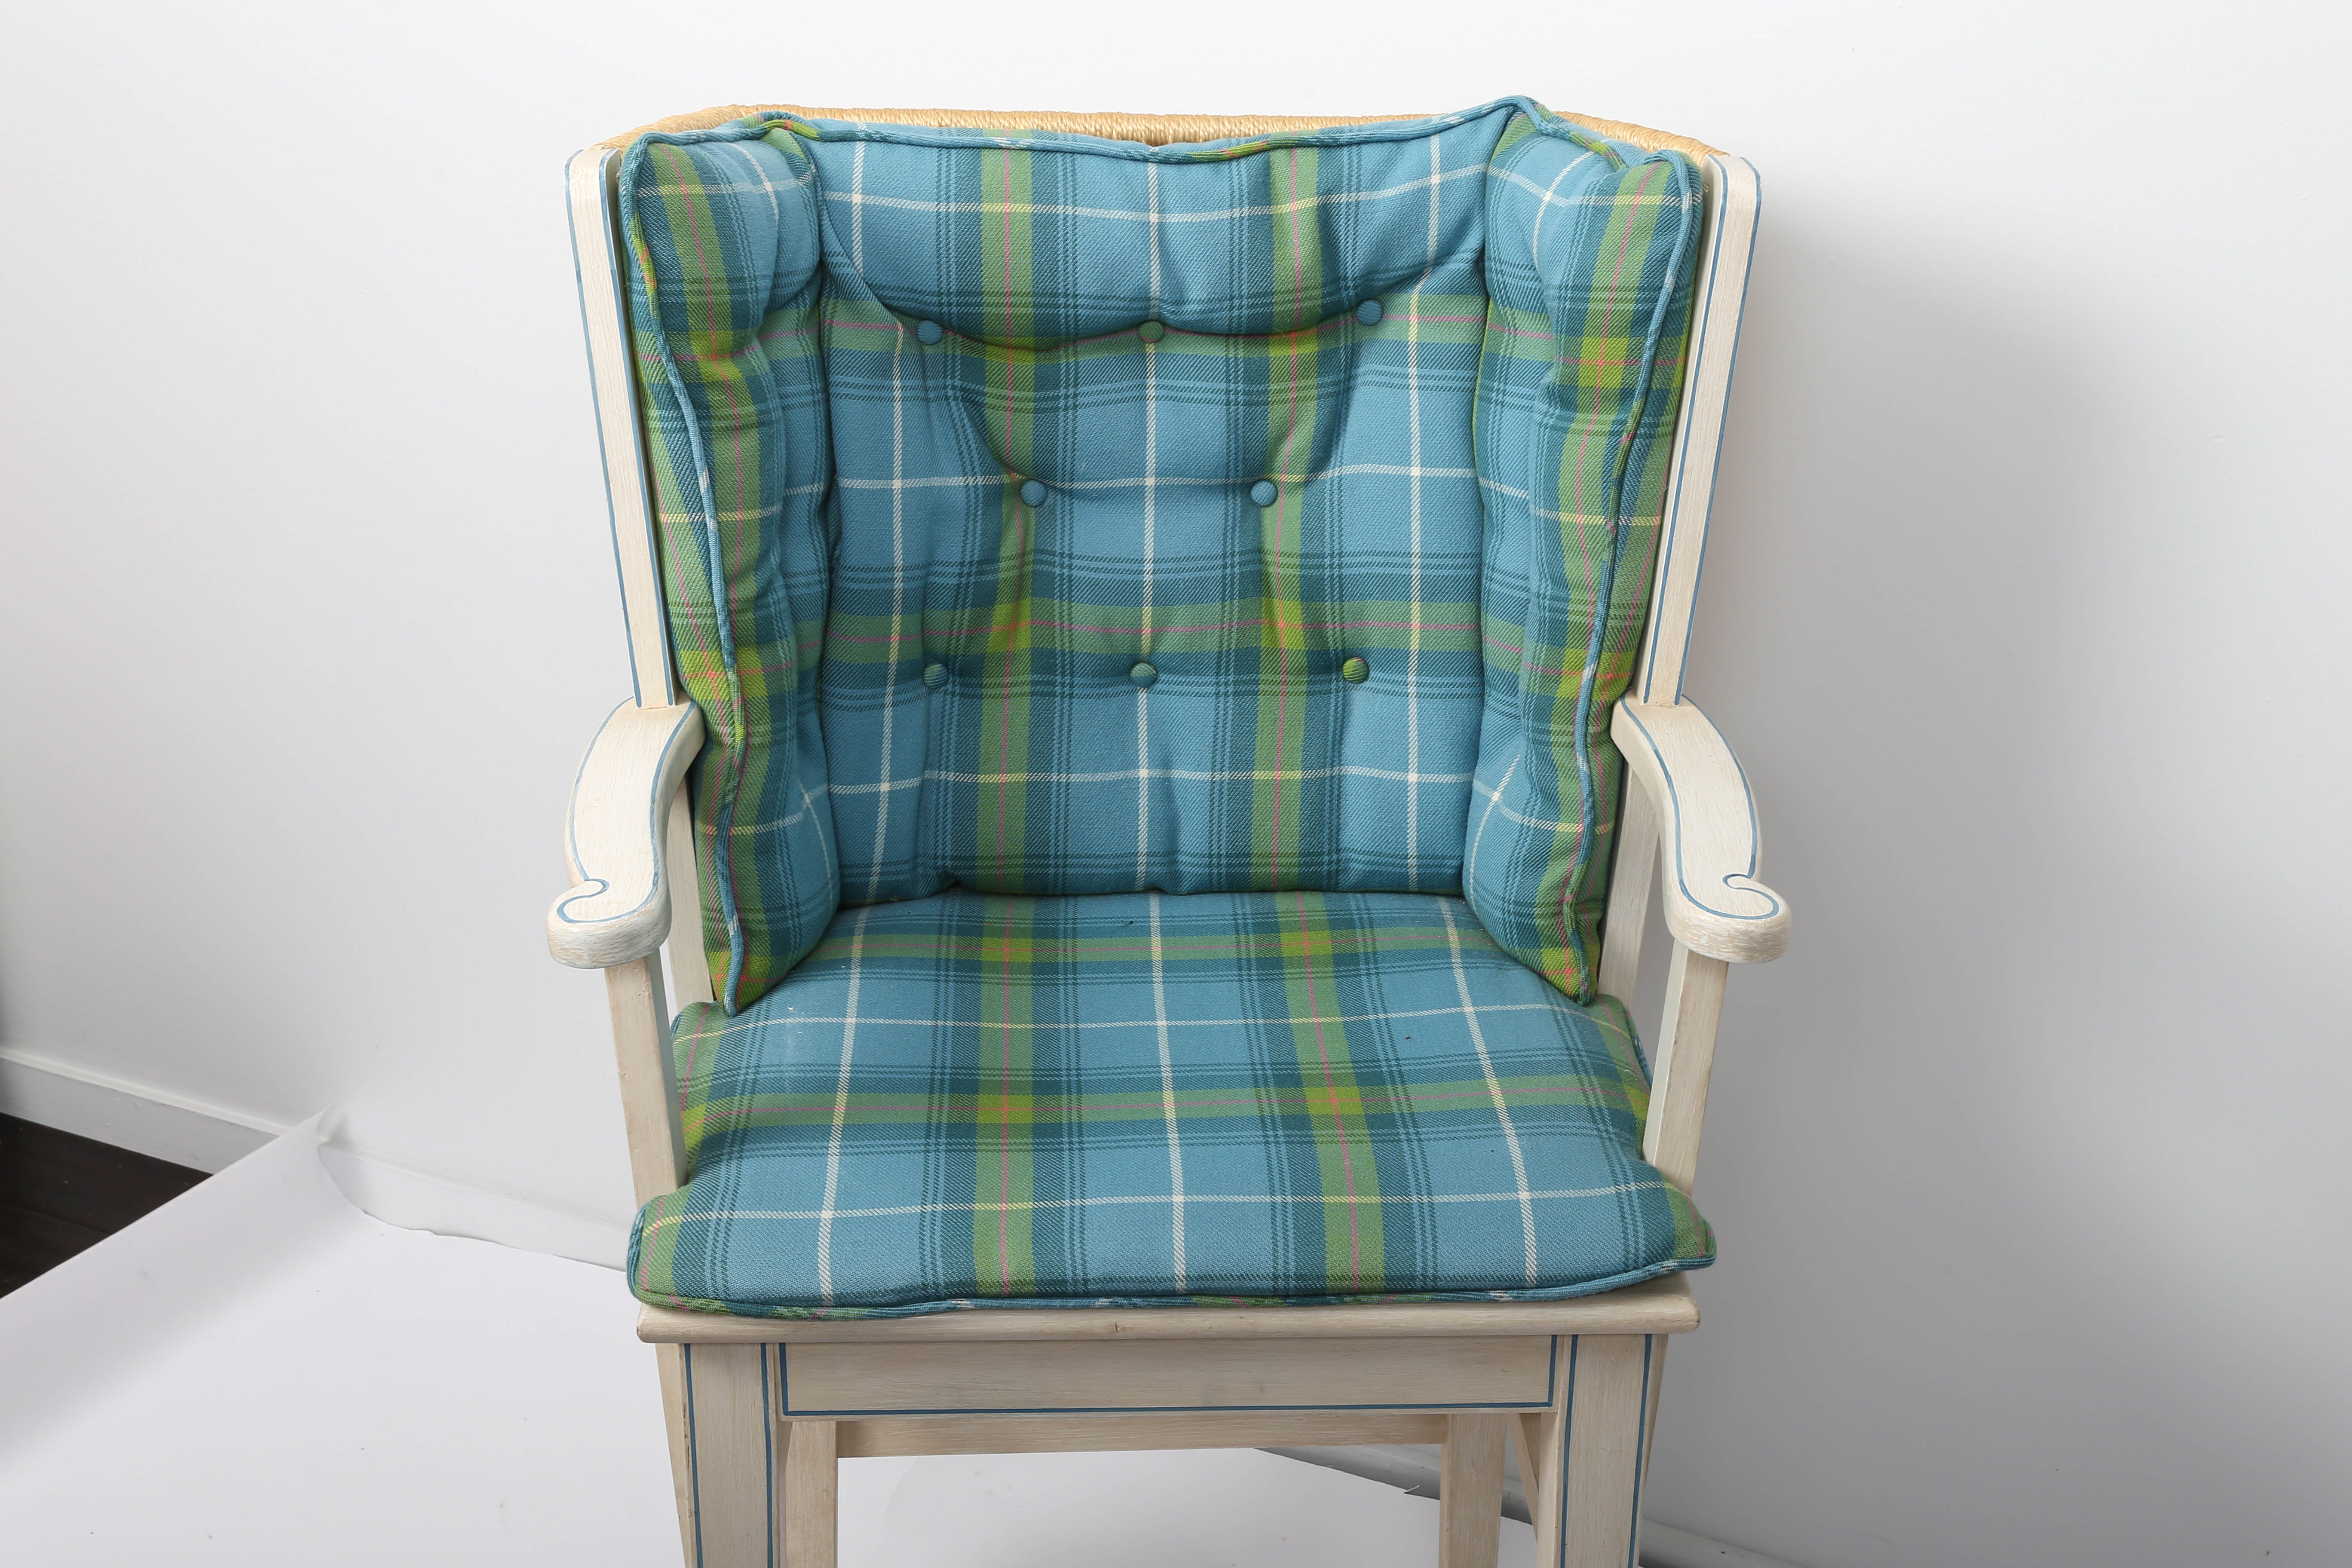 Painted Orkney style barstool with Thrush back and upholstered back cushion.